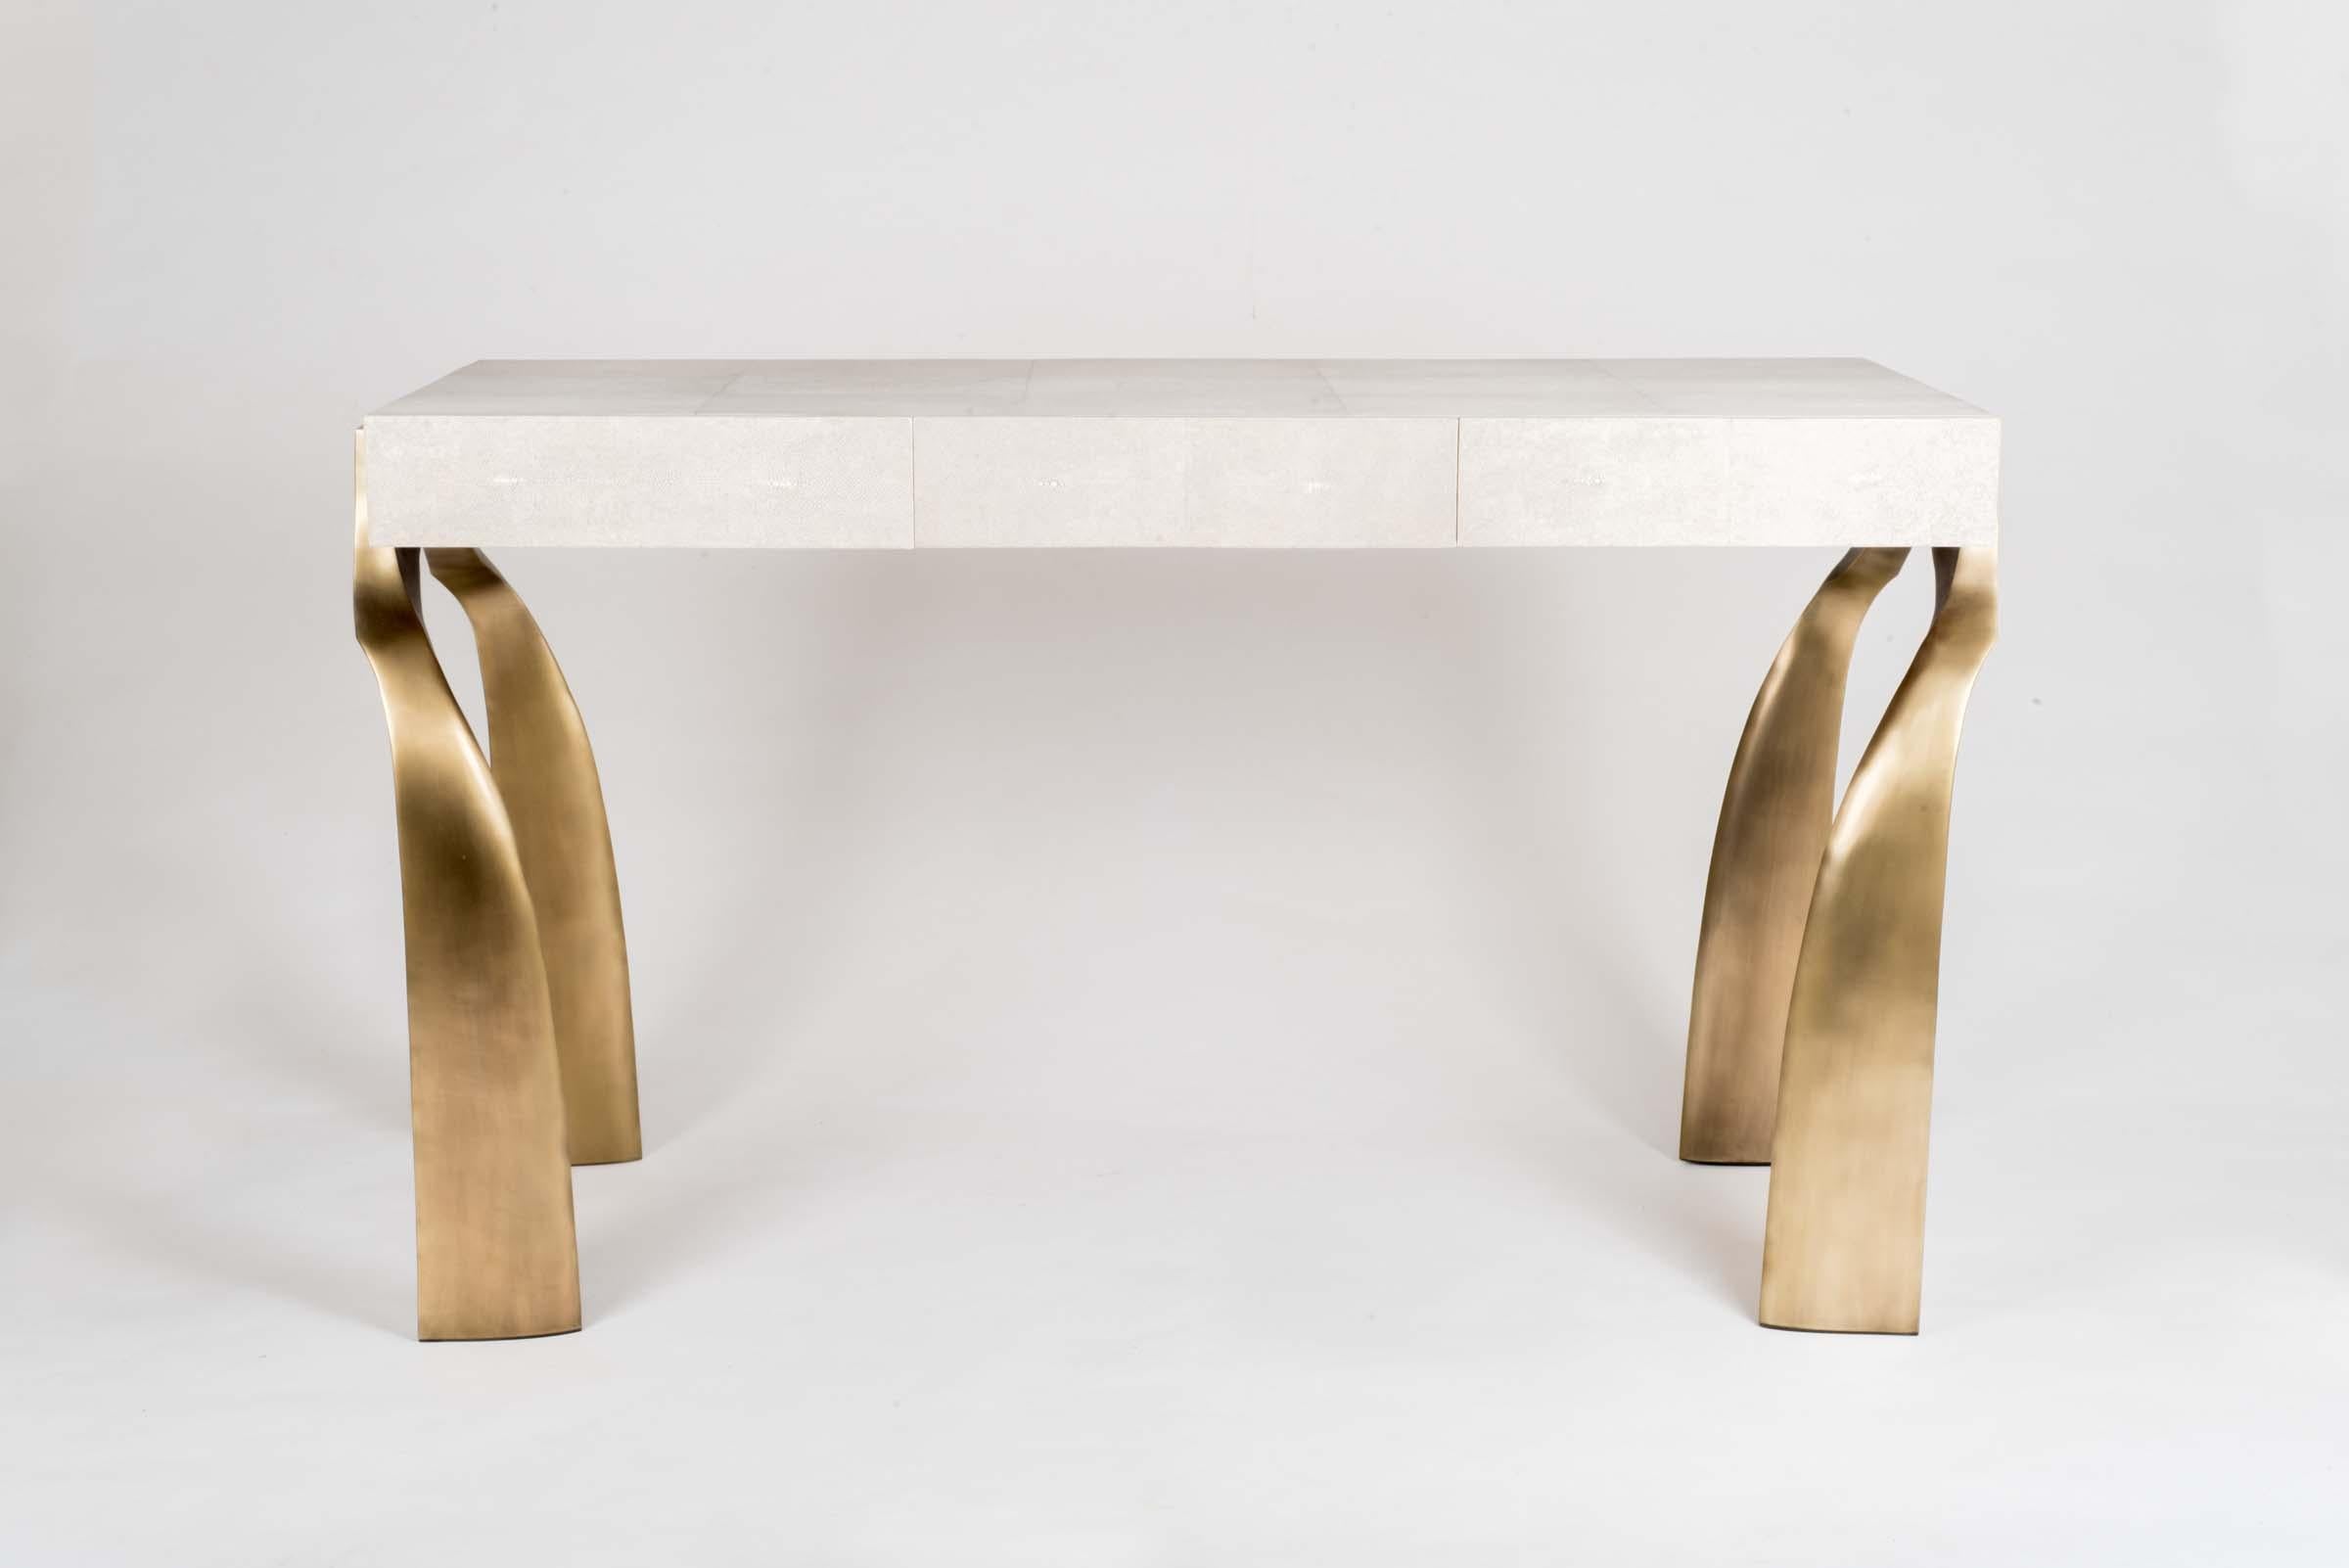 The Galaxy writing desk in cream shagreen, is a classic and sculptural piece with its beautifully shaped bronze-patina brass legs. This piece has three wood-veneer drawers, add a mirror and this desk becomes a vanity. The shagreen is hand-dyed by